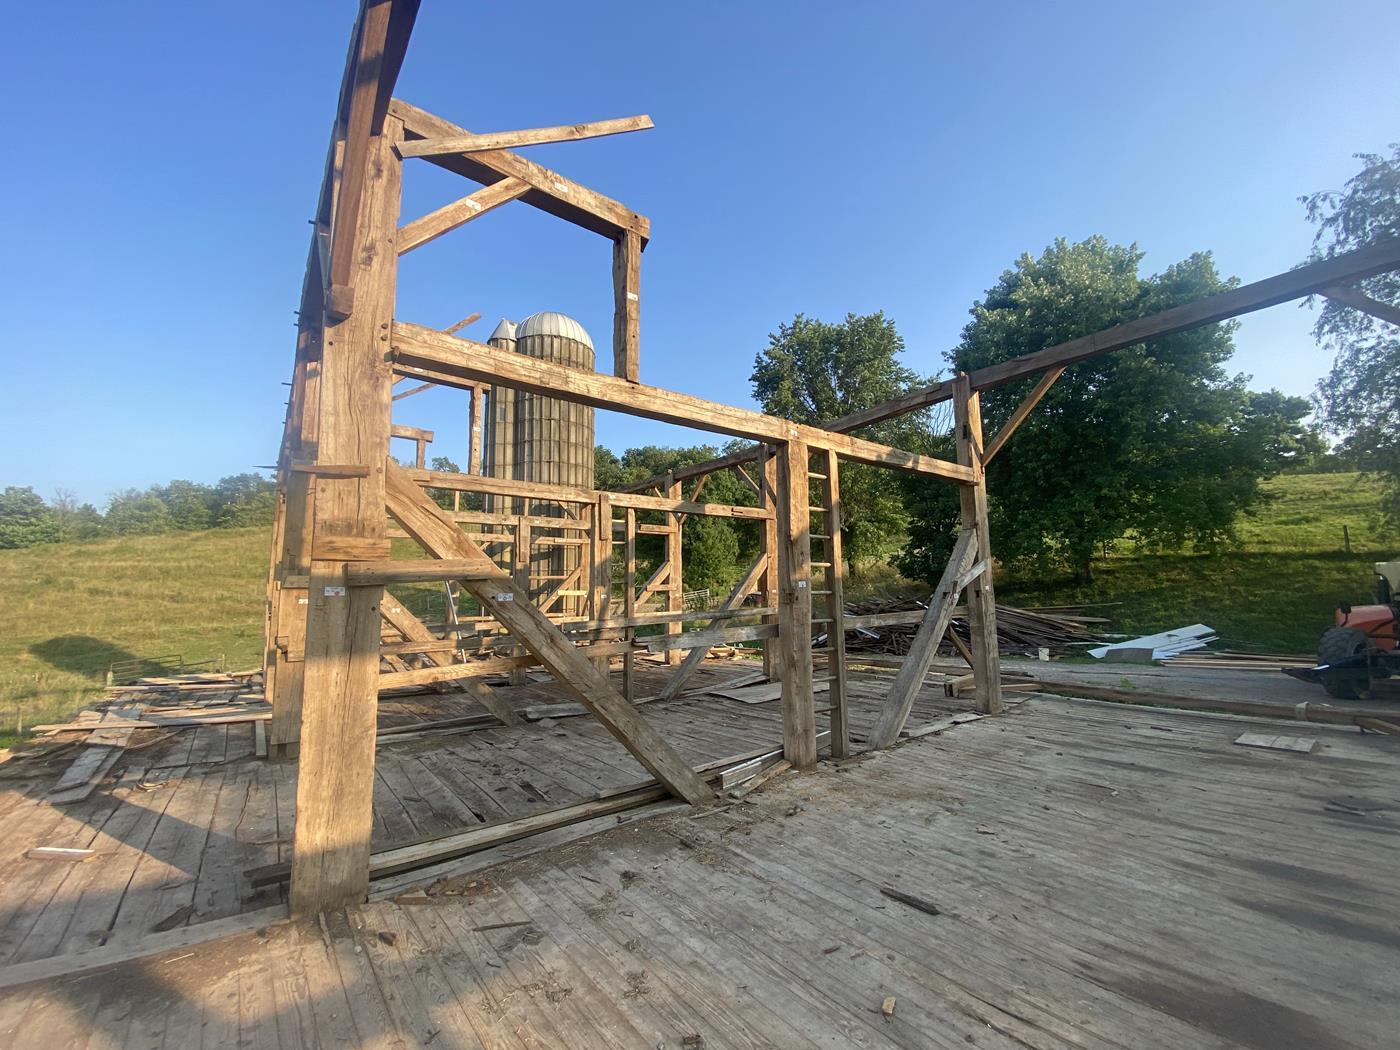 https://www.ohiovalleybarnsalvage.com/images/Beachy Historic Ohio Barn Frame - Your Source For Reclaimed Fireplace Mantels